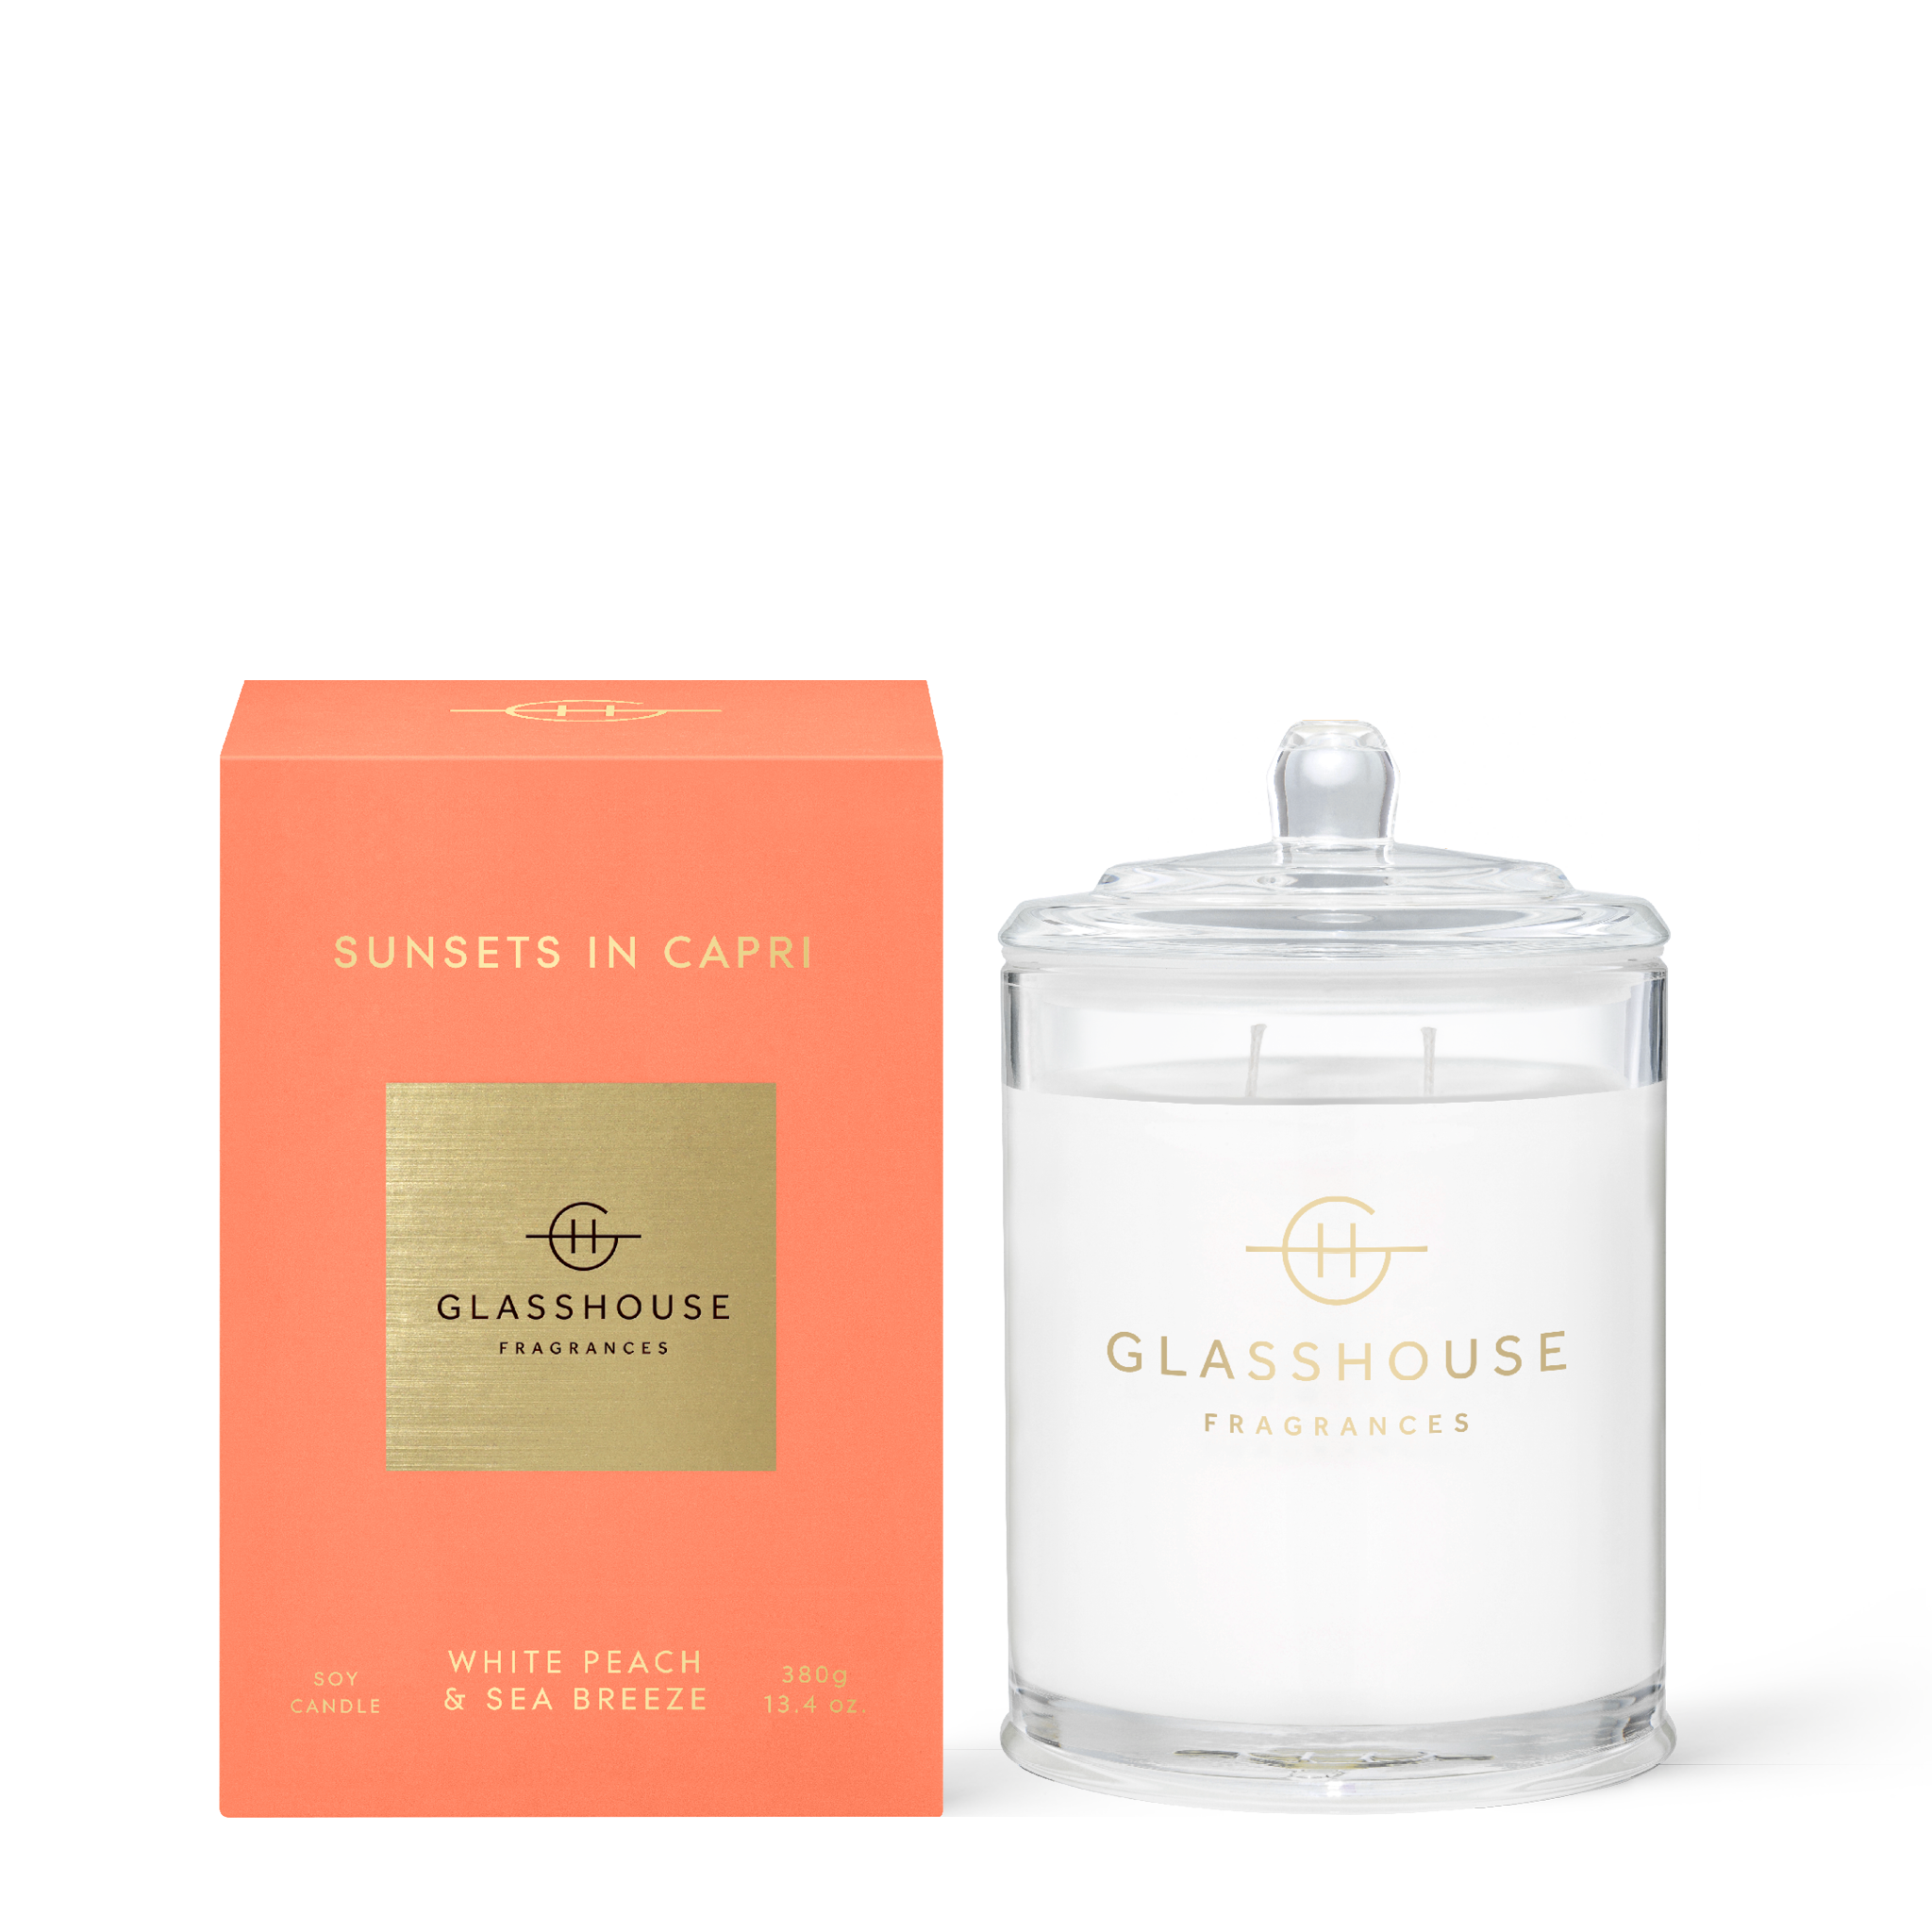 Glasshouse Fragrances Sunsets In Capri White Peach & Sea Breeze 380g Soy Candle 